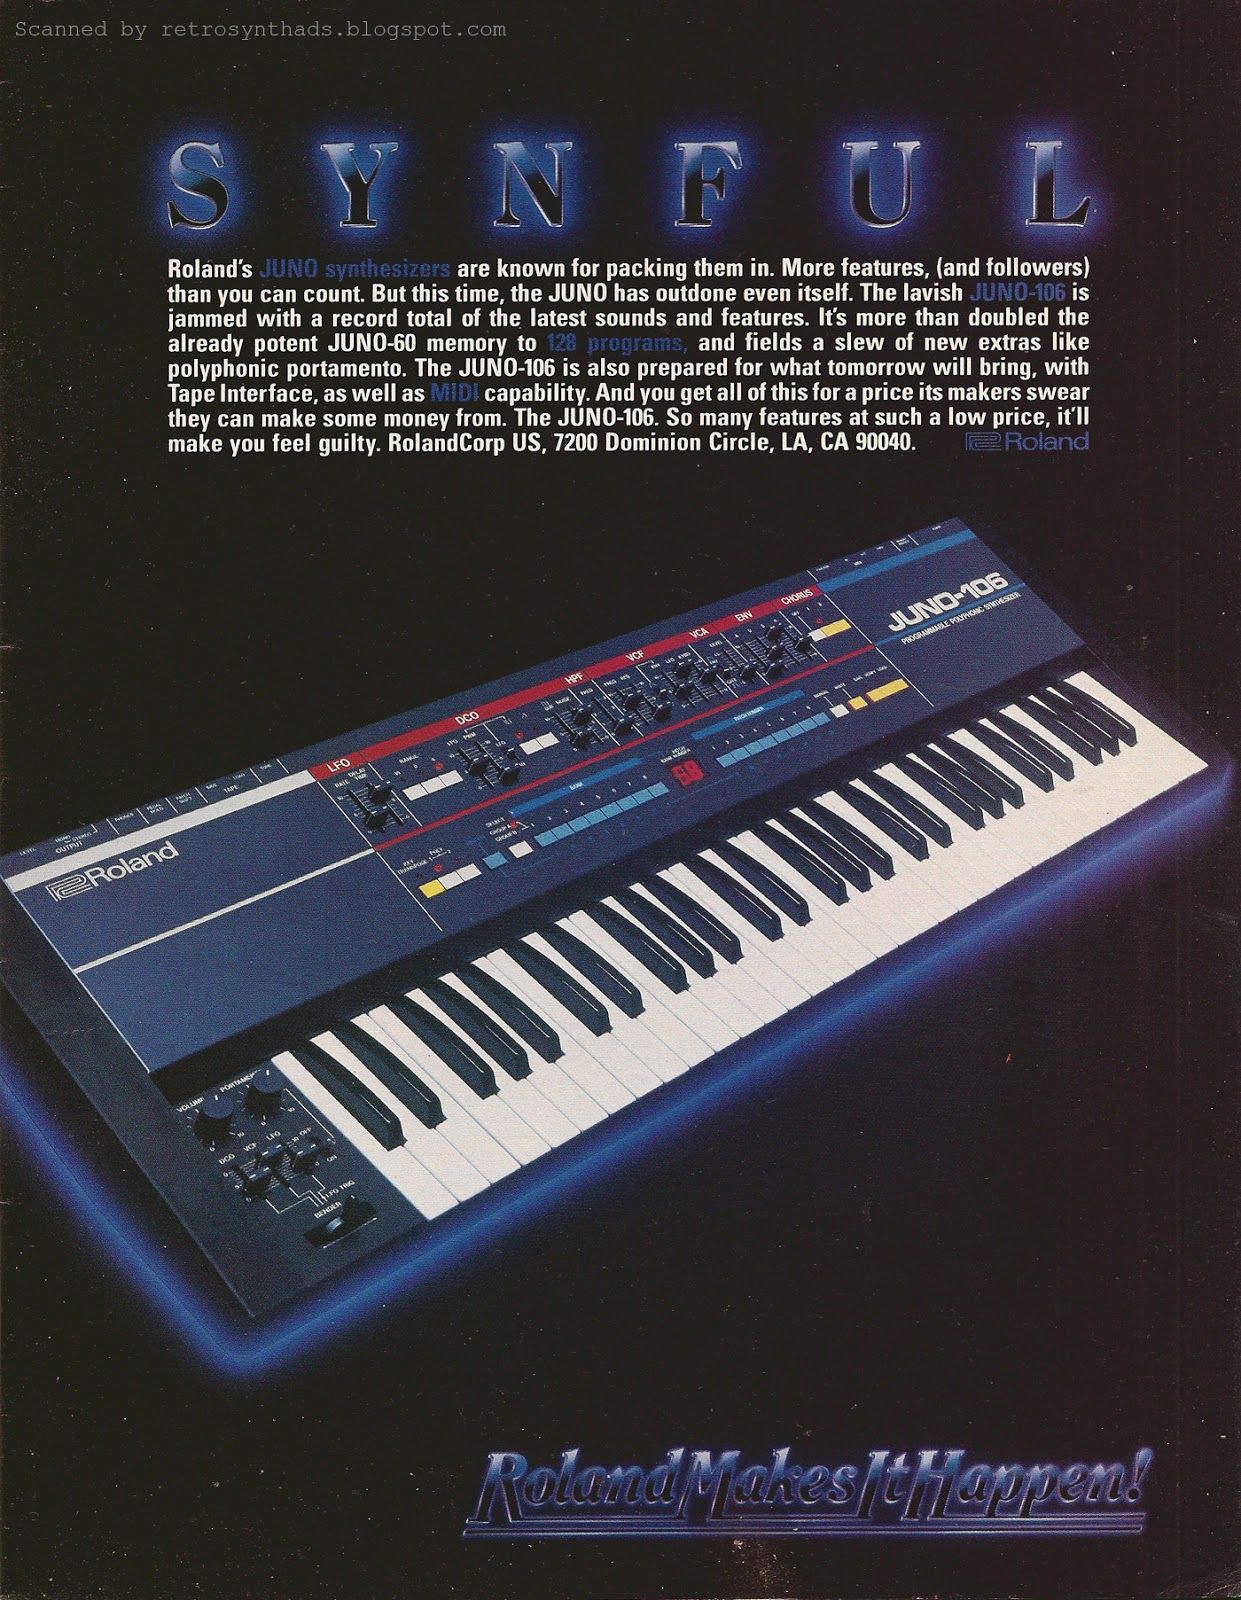 Vintage synth ads